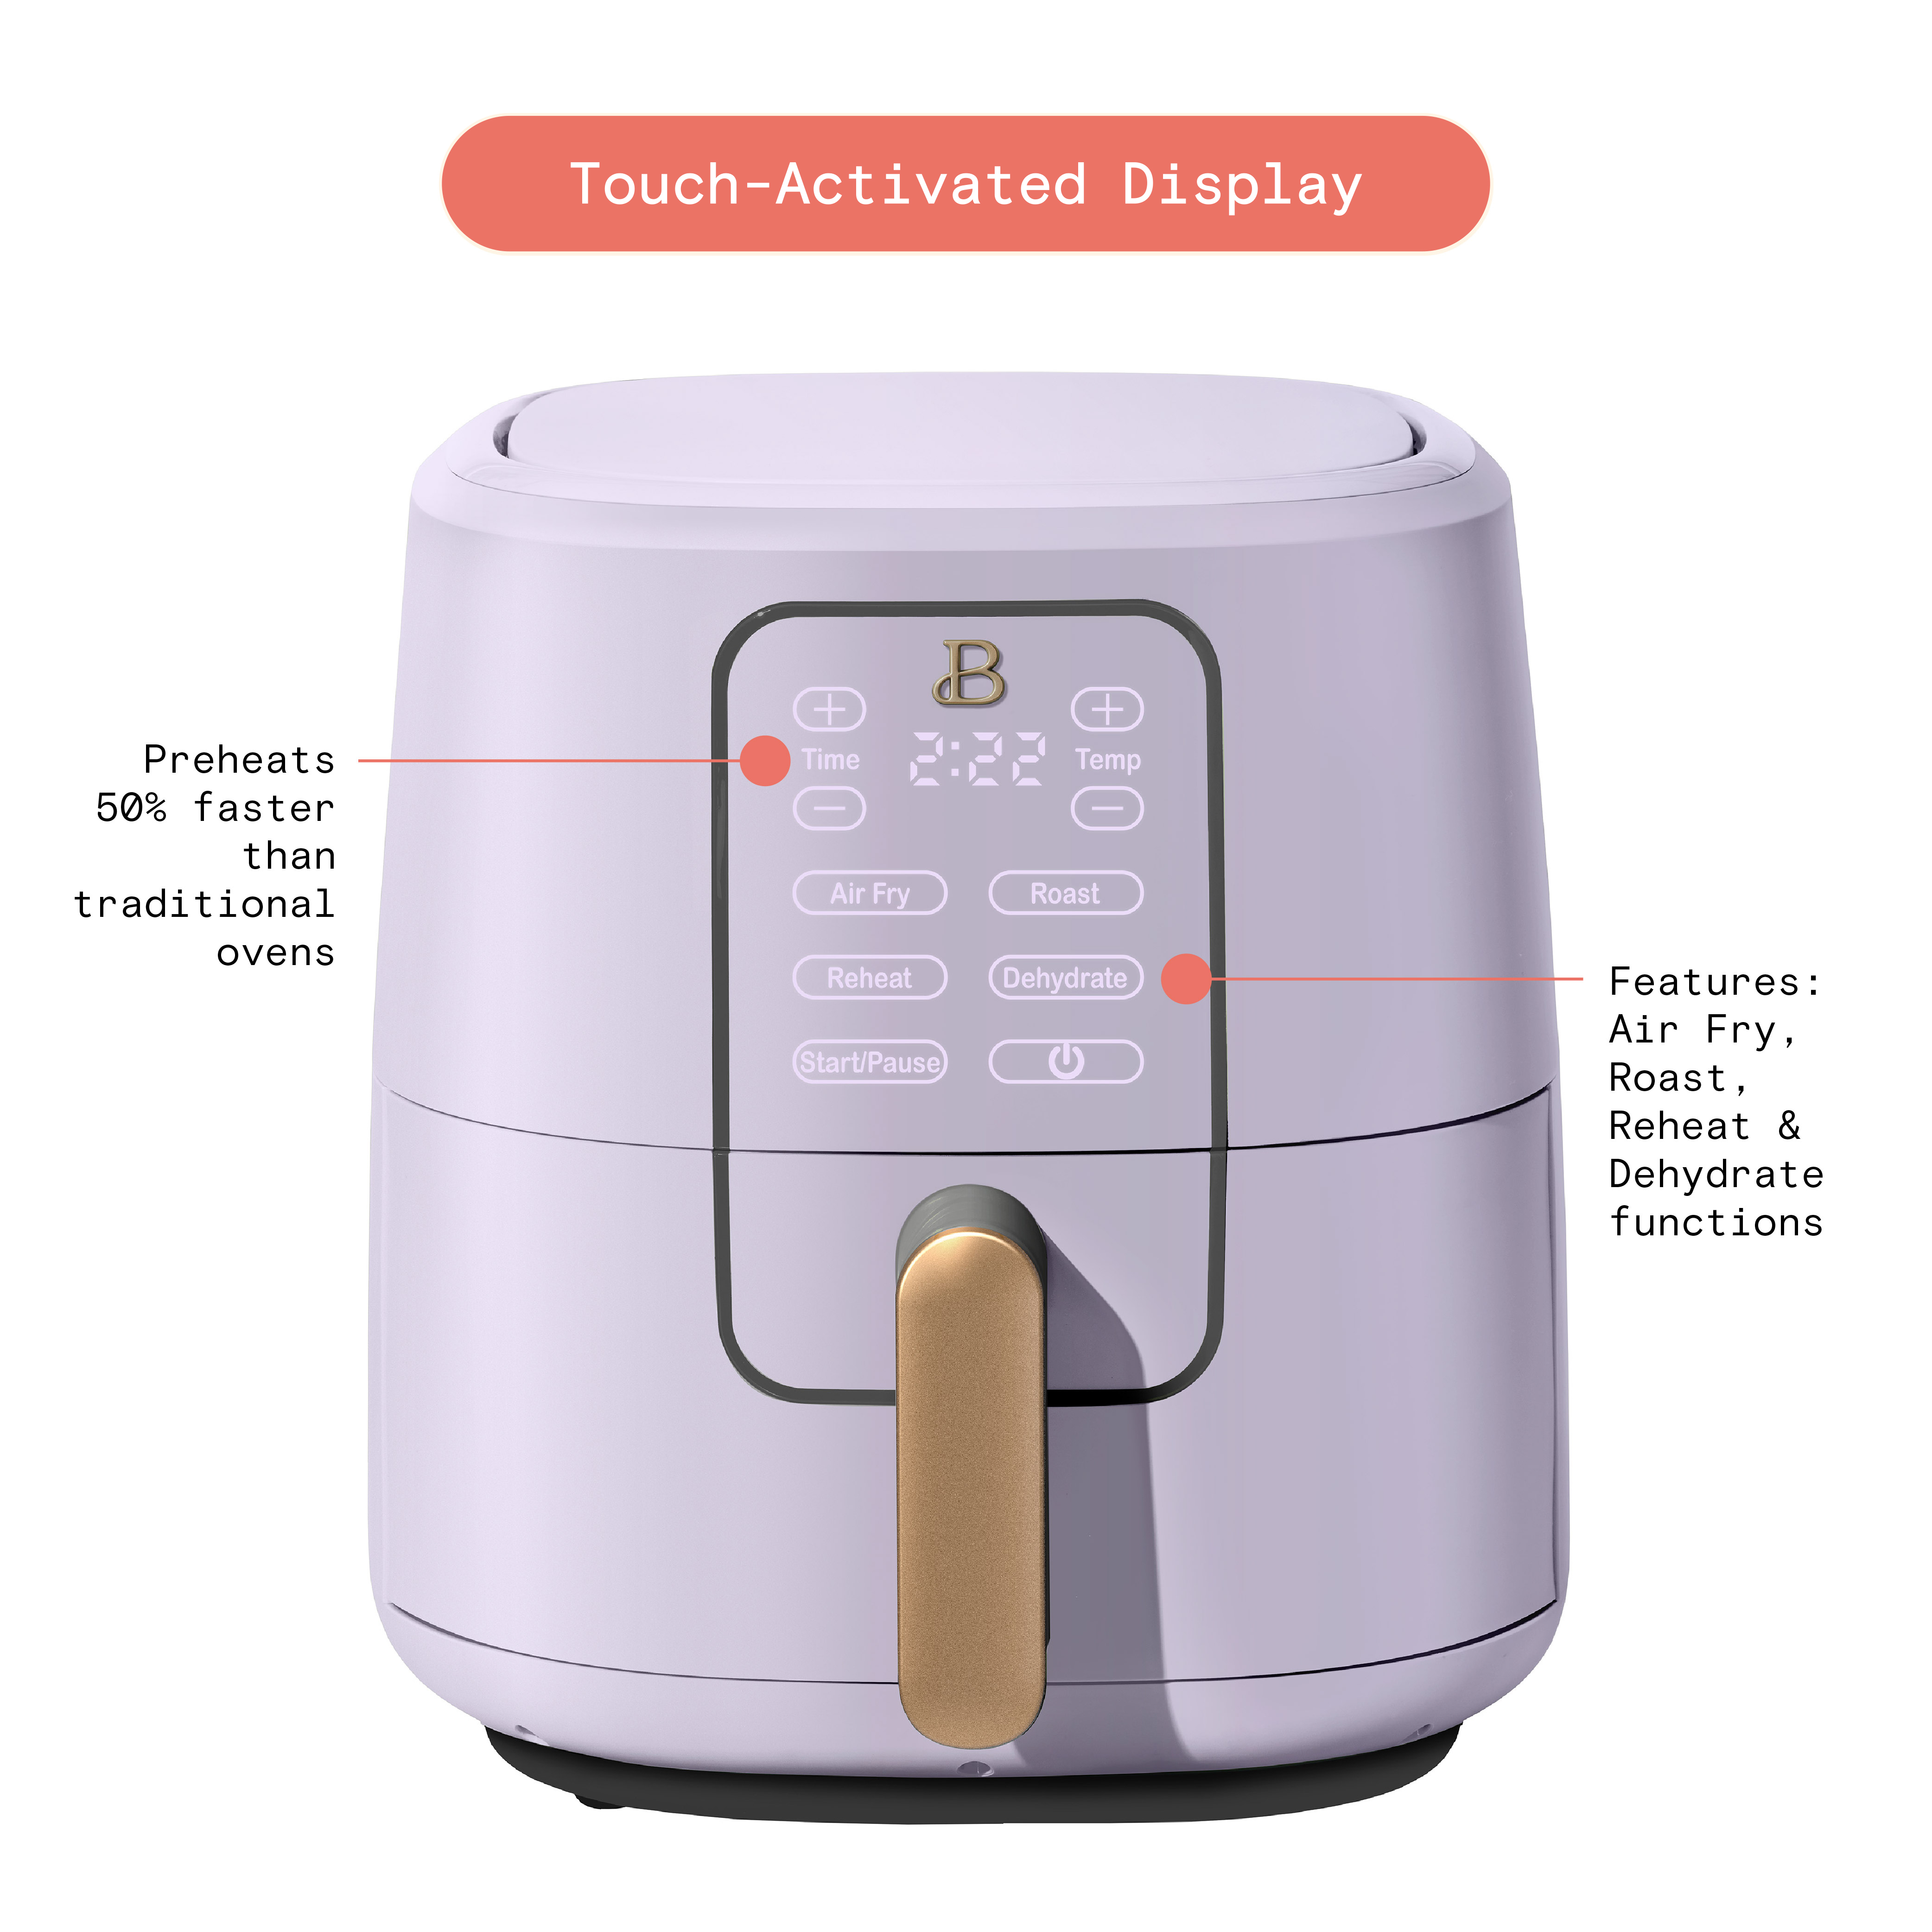 Beautiful 6 Qt Air Fryer with TurboCrisp Technology and Touch-Activated Display, Lavender by Drew Barrymore - image 4 of 10